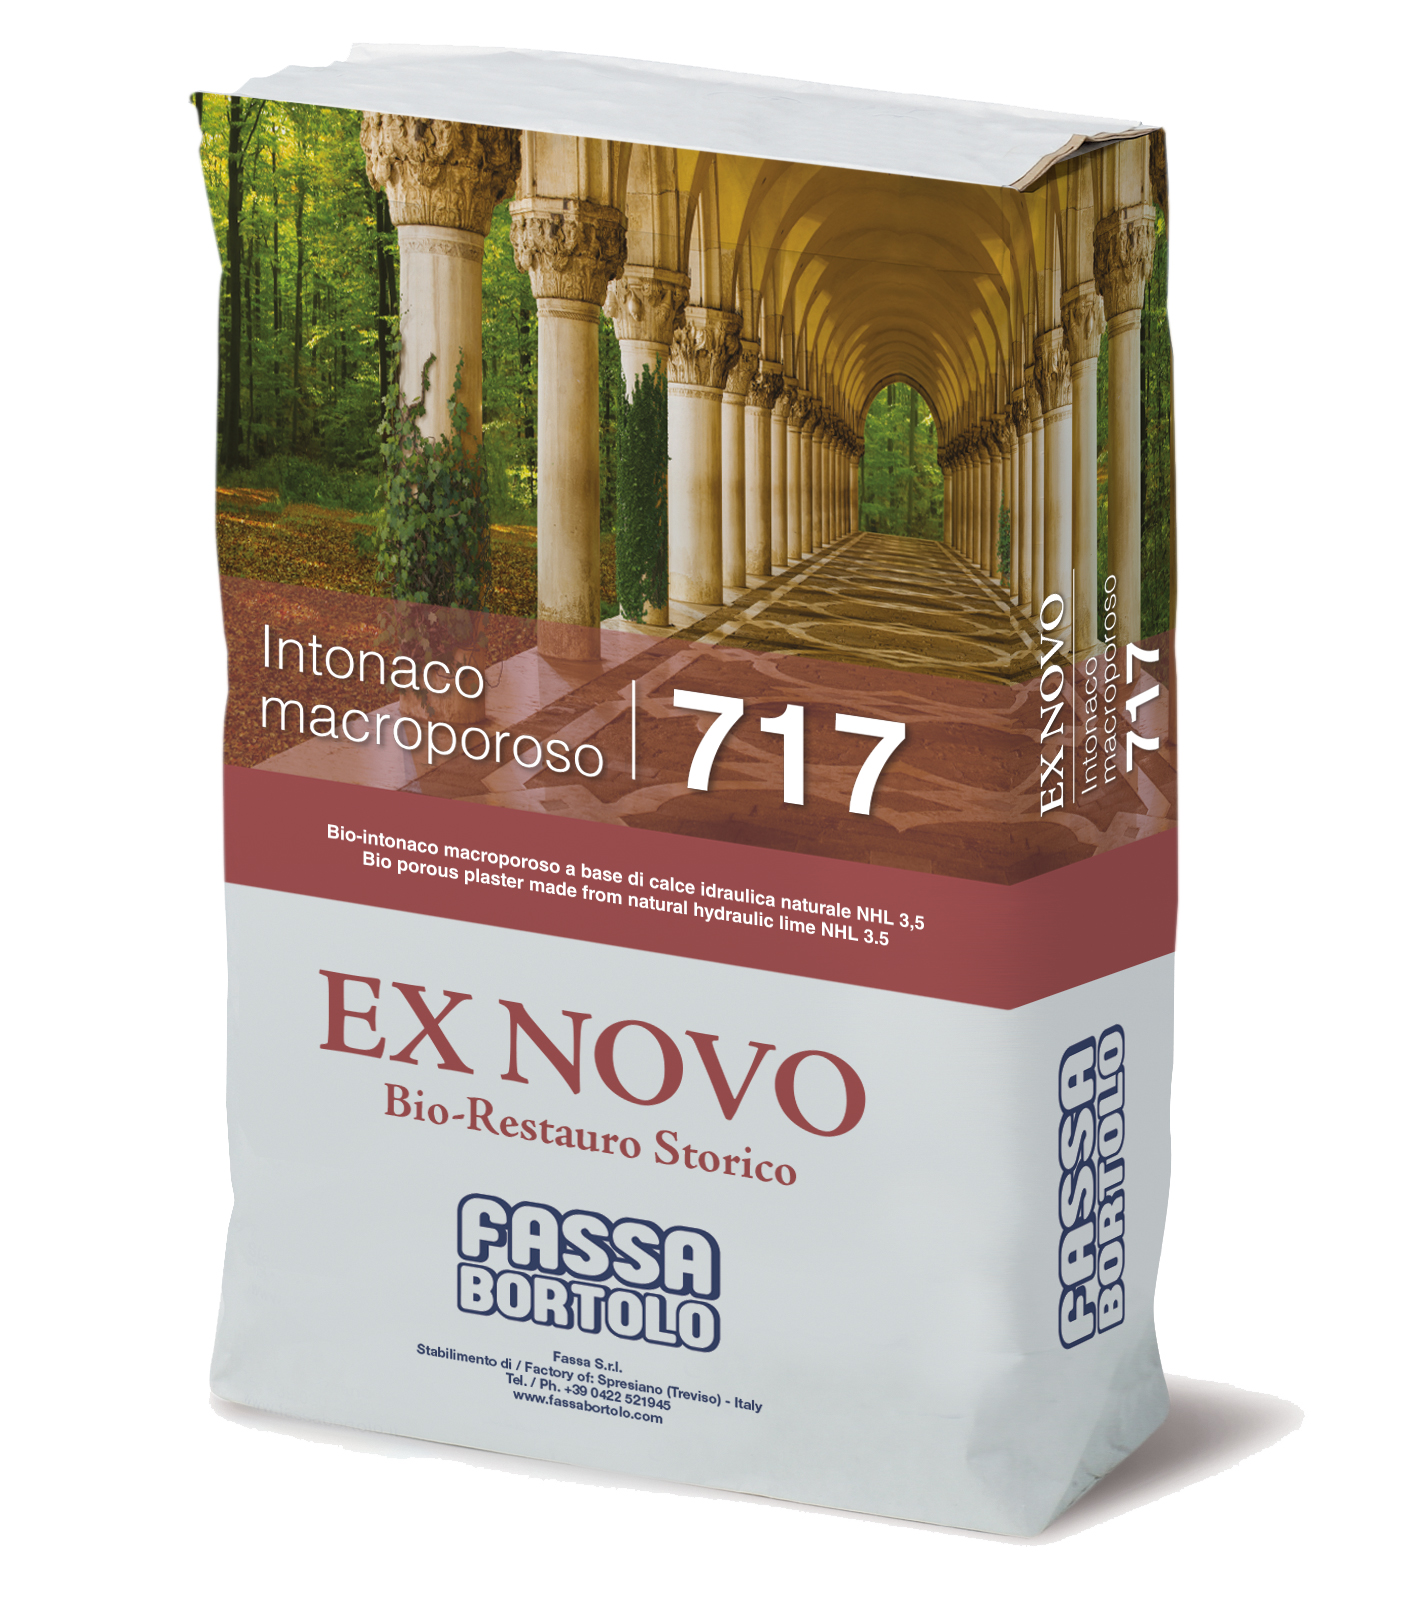 INTONACO MACROPOROSO 717: Bio base coat plaster made from NHL 3.5 natural hydraulic lime for the restoration of damp masonry, for interiors and exteriors